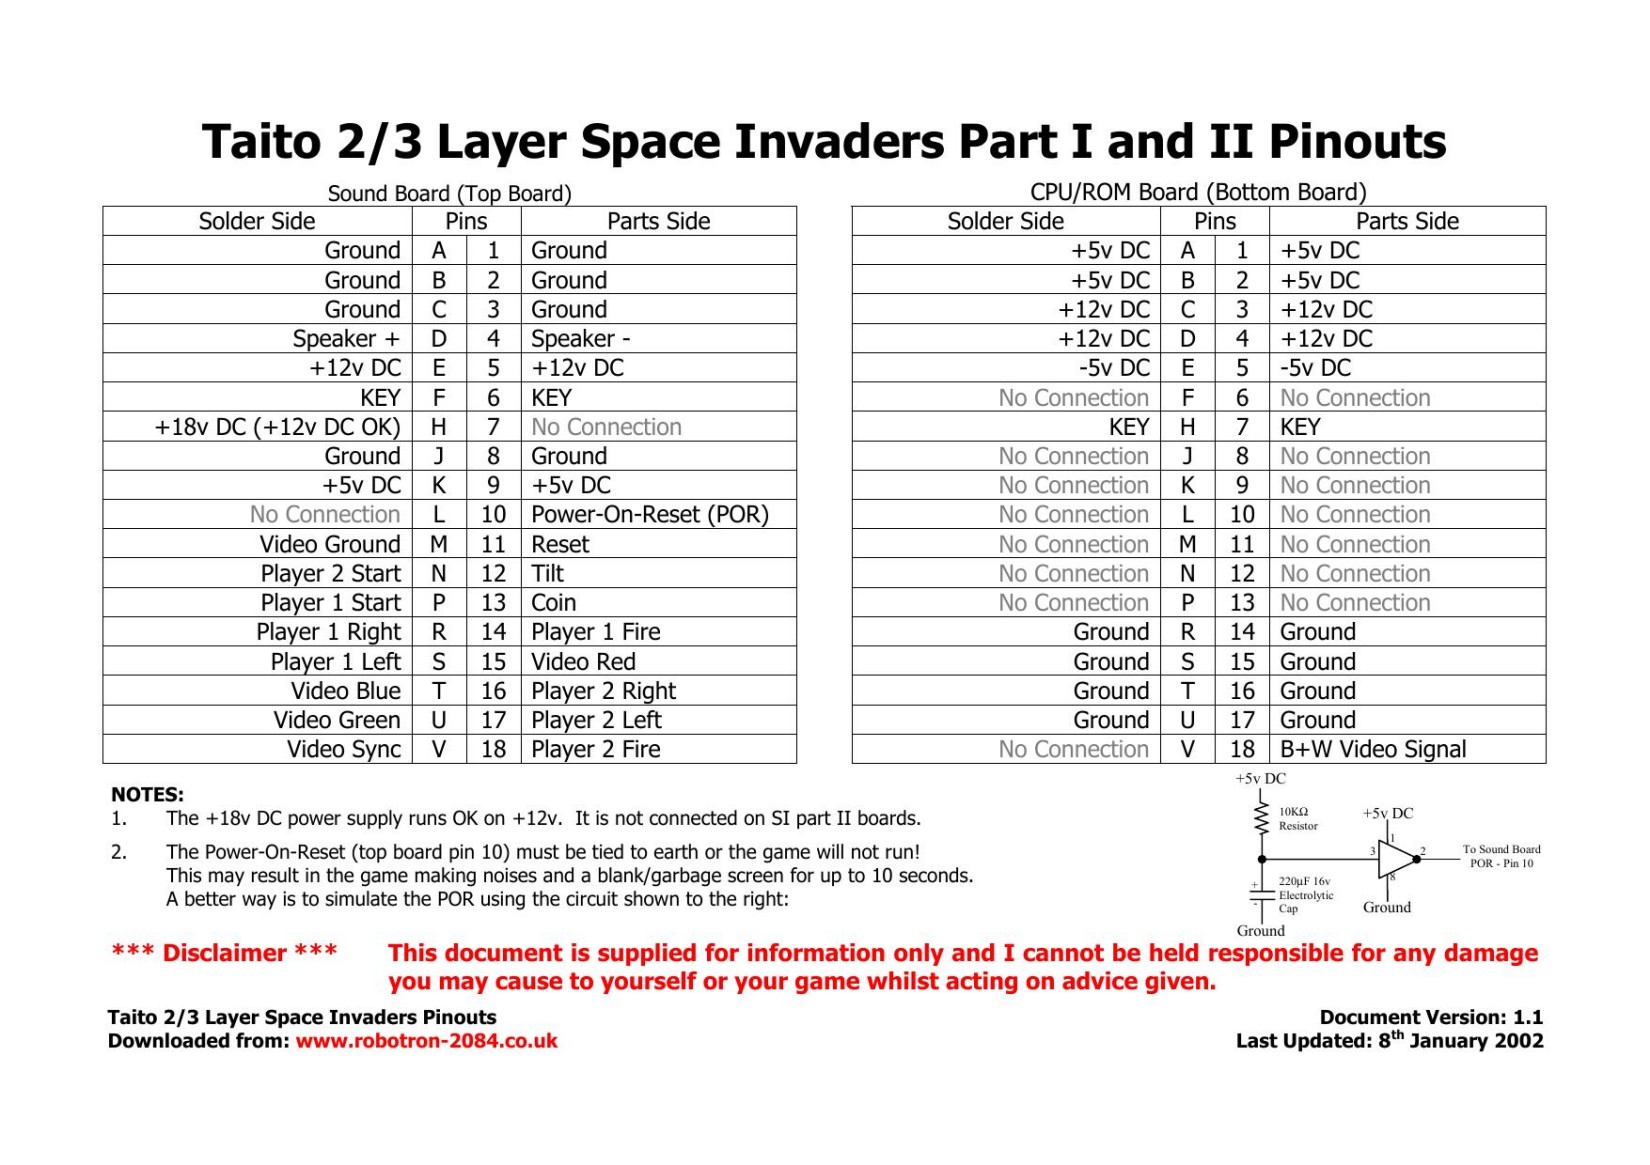 Taito 2/3 Layer Space Invaders Part I and II Pinouts